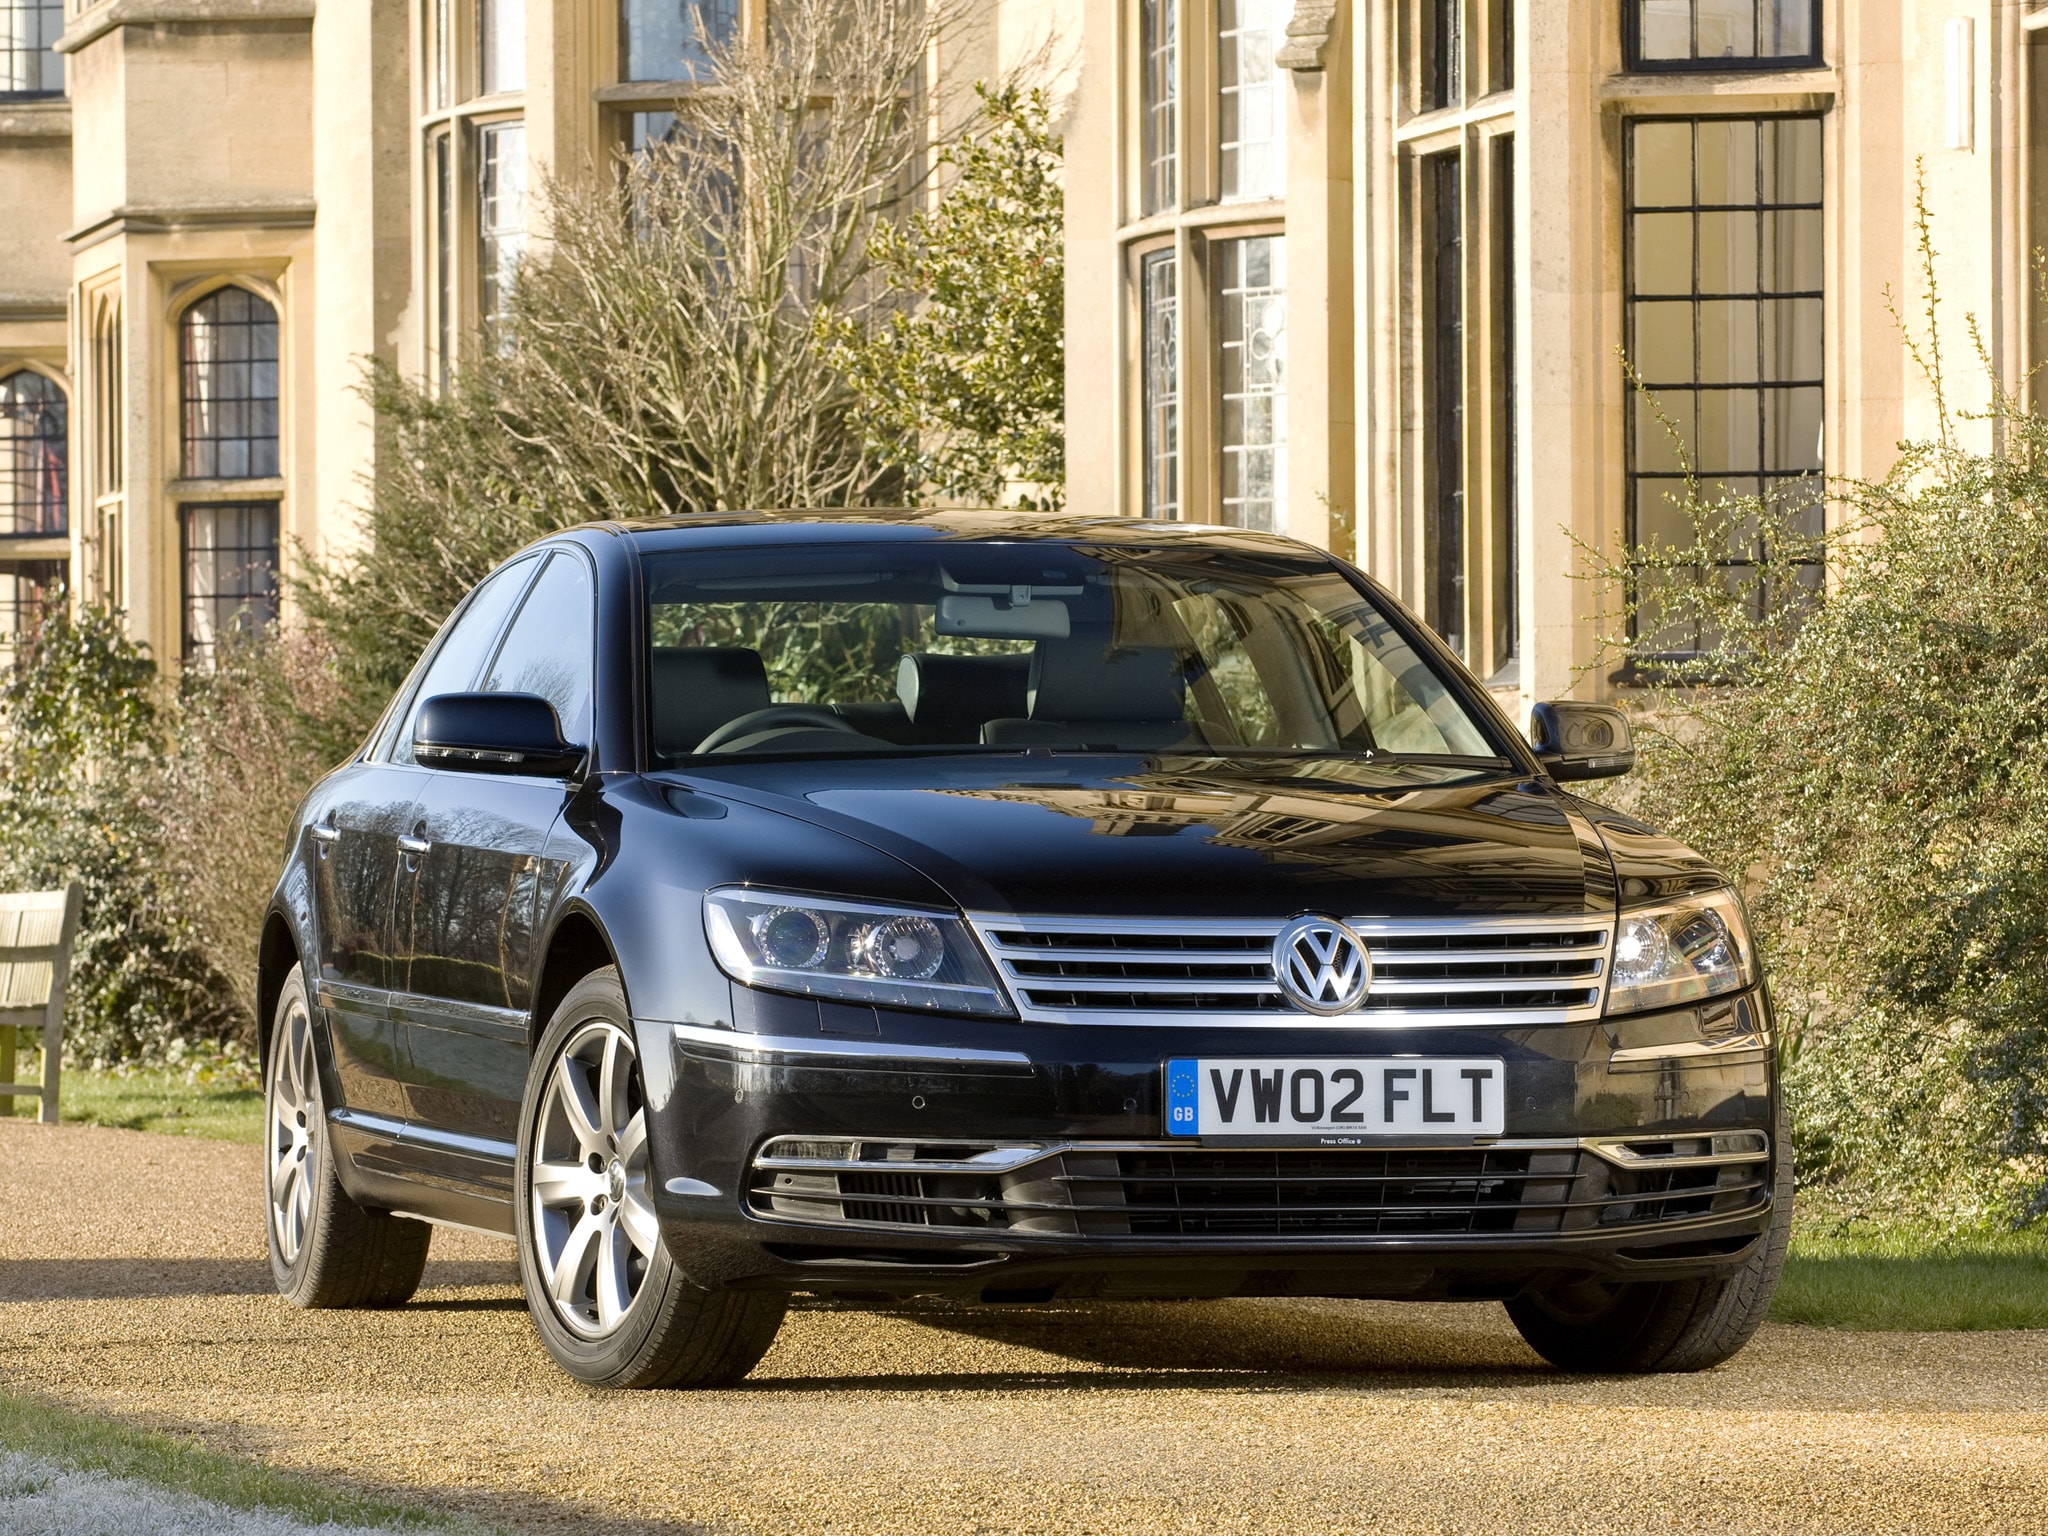 Volkswagen Phaeton Discontinued in the UK Due to Slow Sales